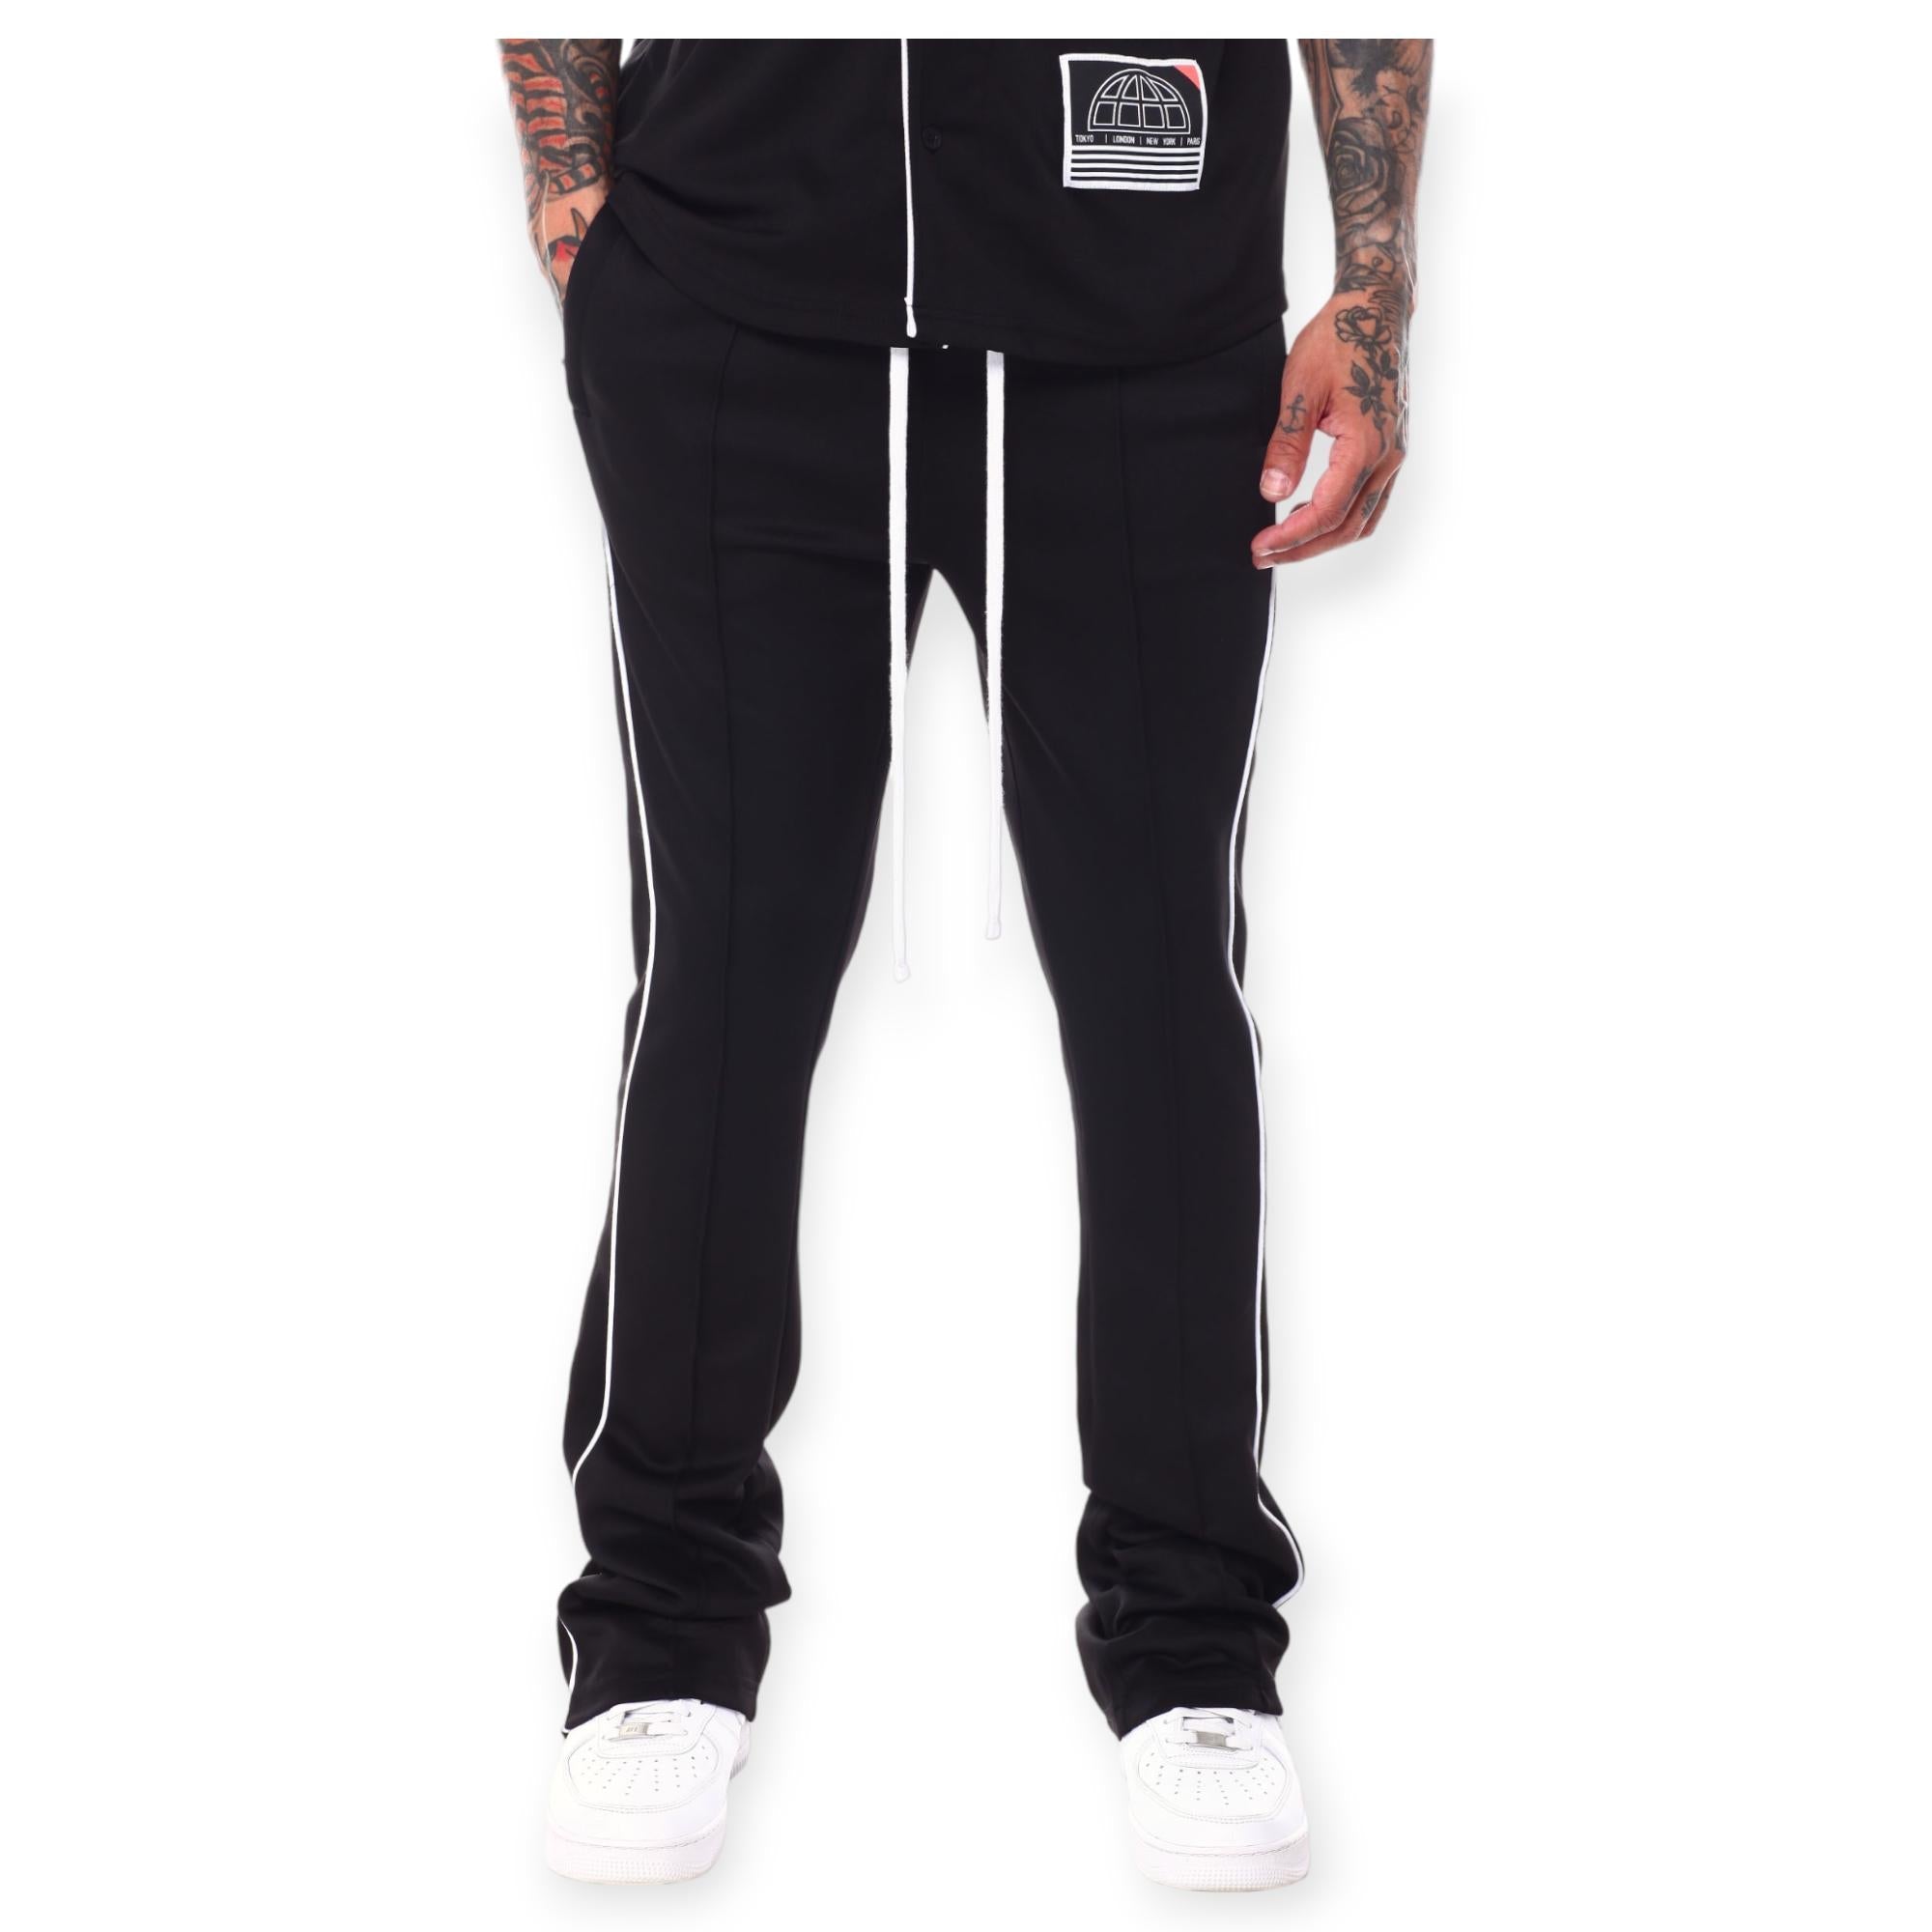 White Sports Track Pants - Buy White Sports Track Pants online in India